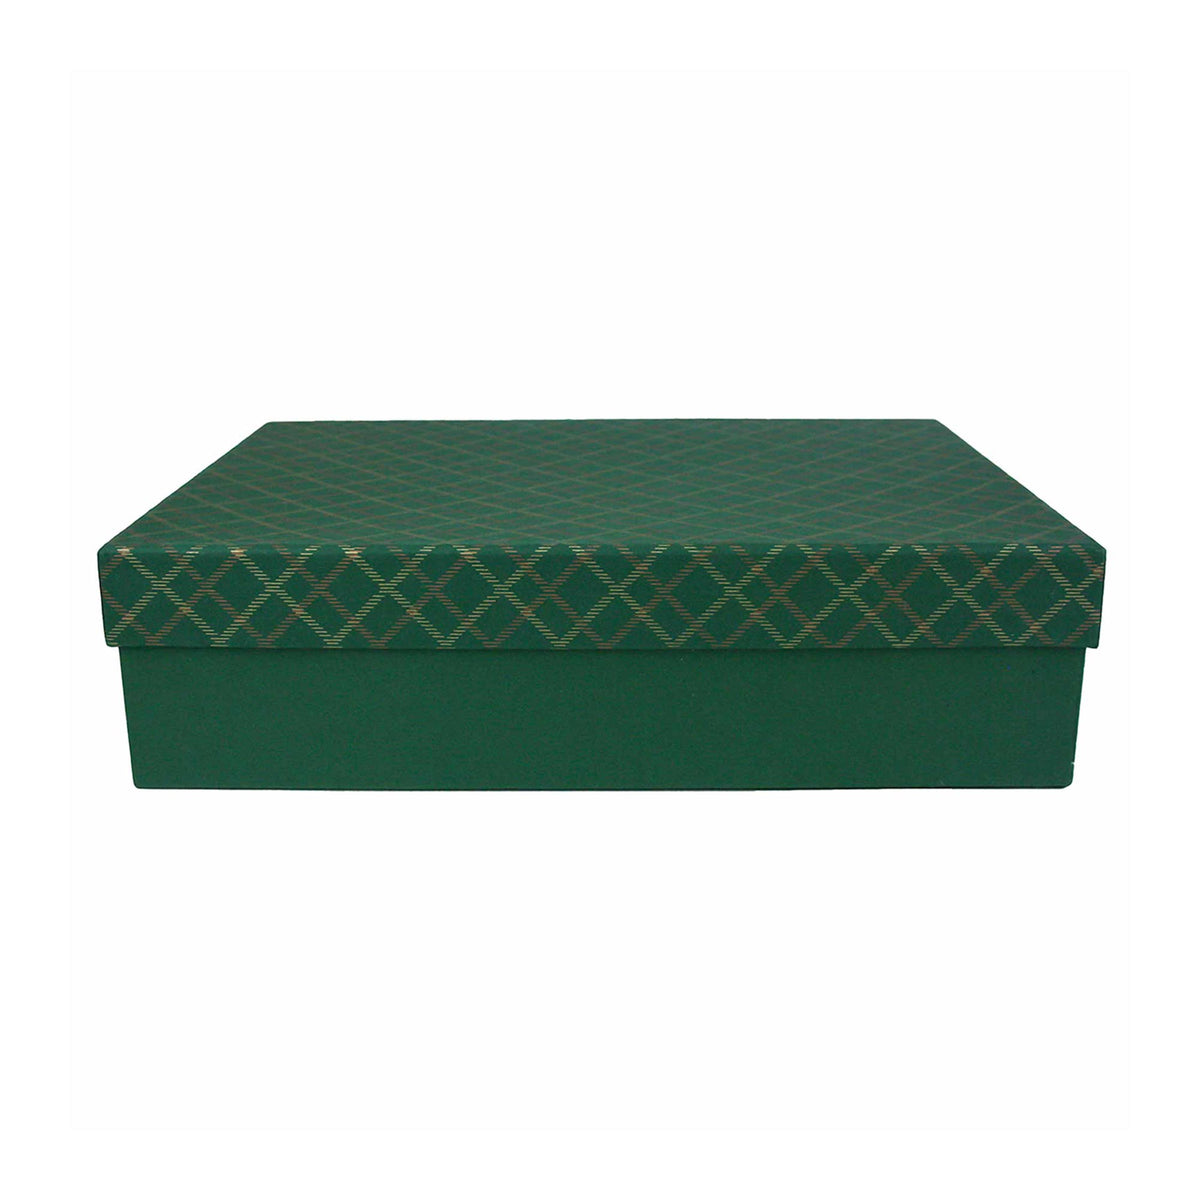 Handcrafted Chequered Green Gift Box - Single (Sizes Available)